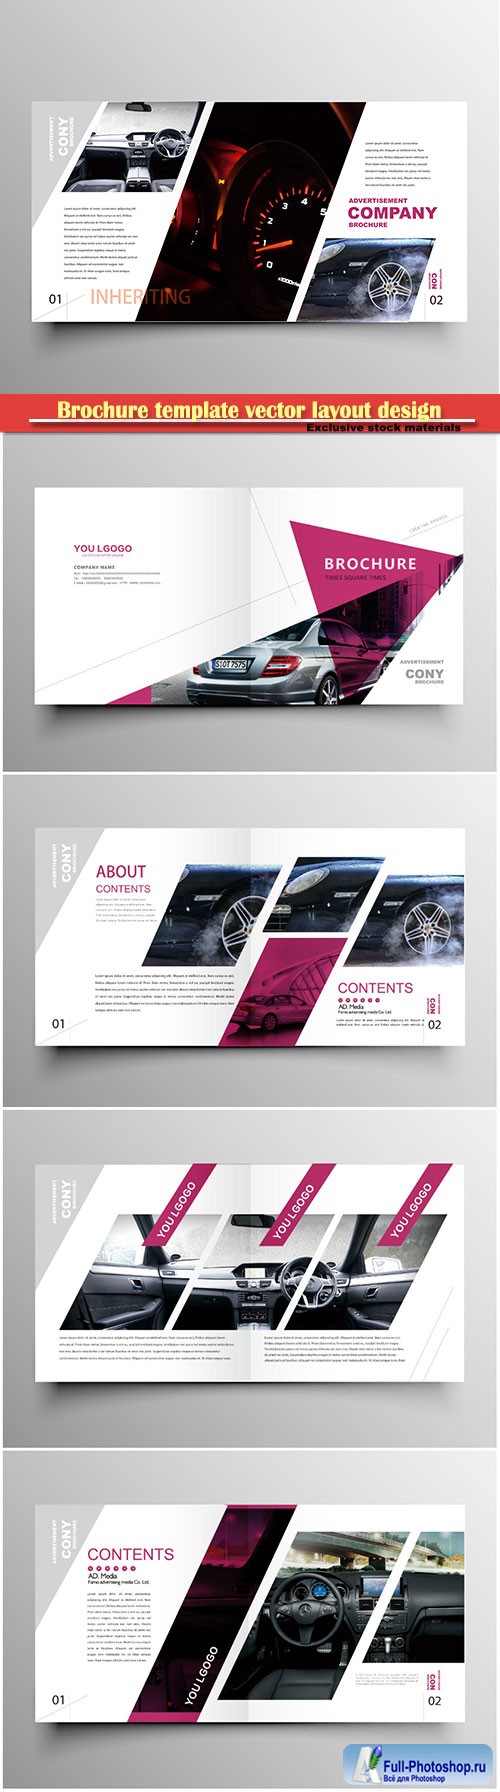 Brochure template vector layout design, corporate business annual report, magazine, flyer mockup # 185